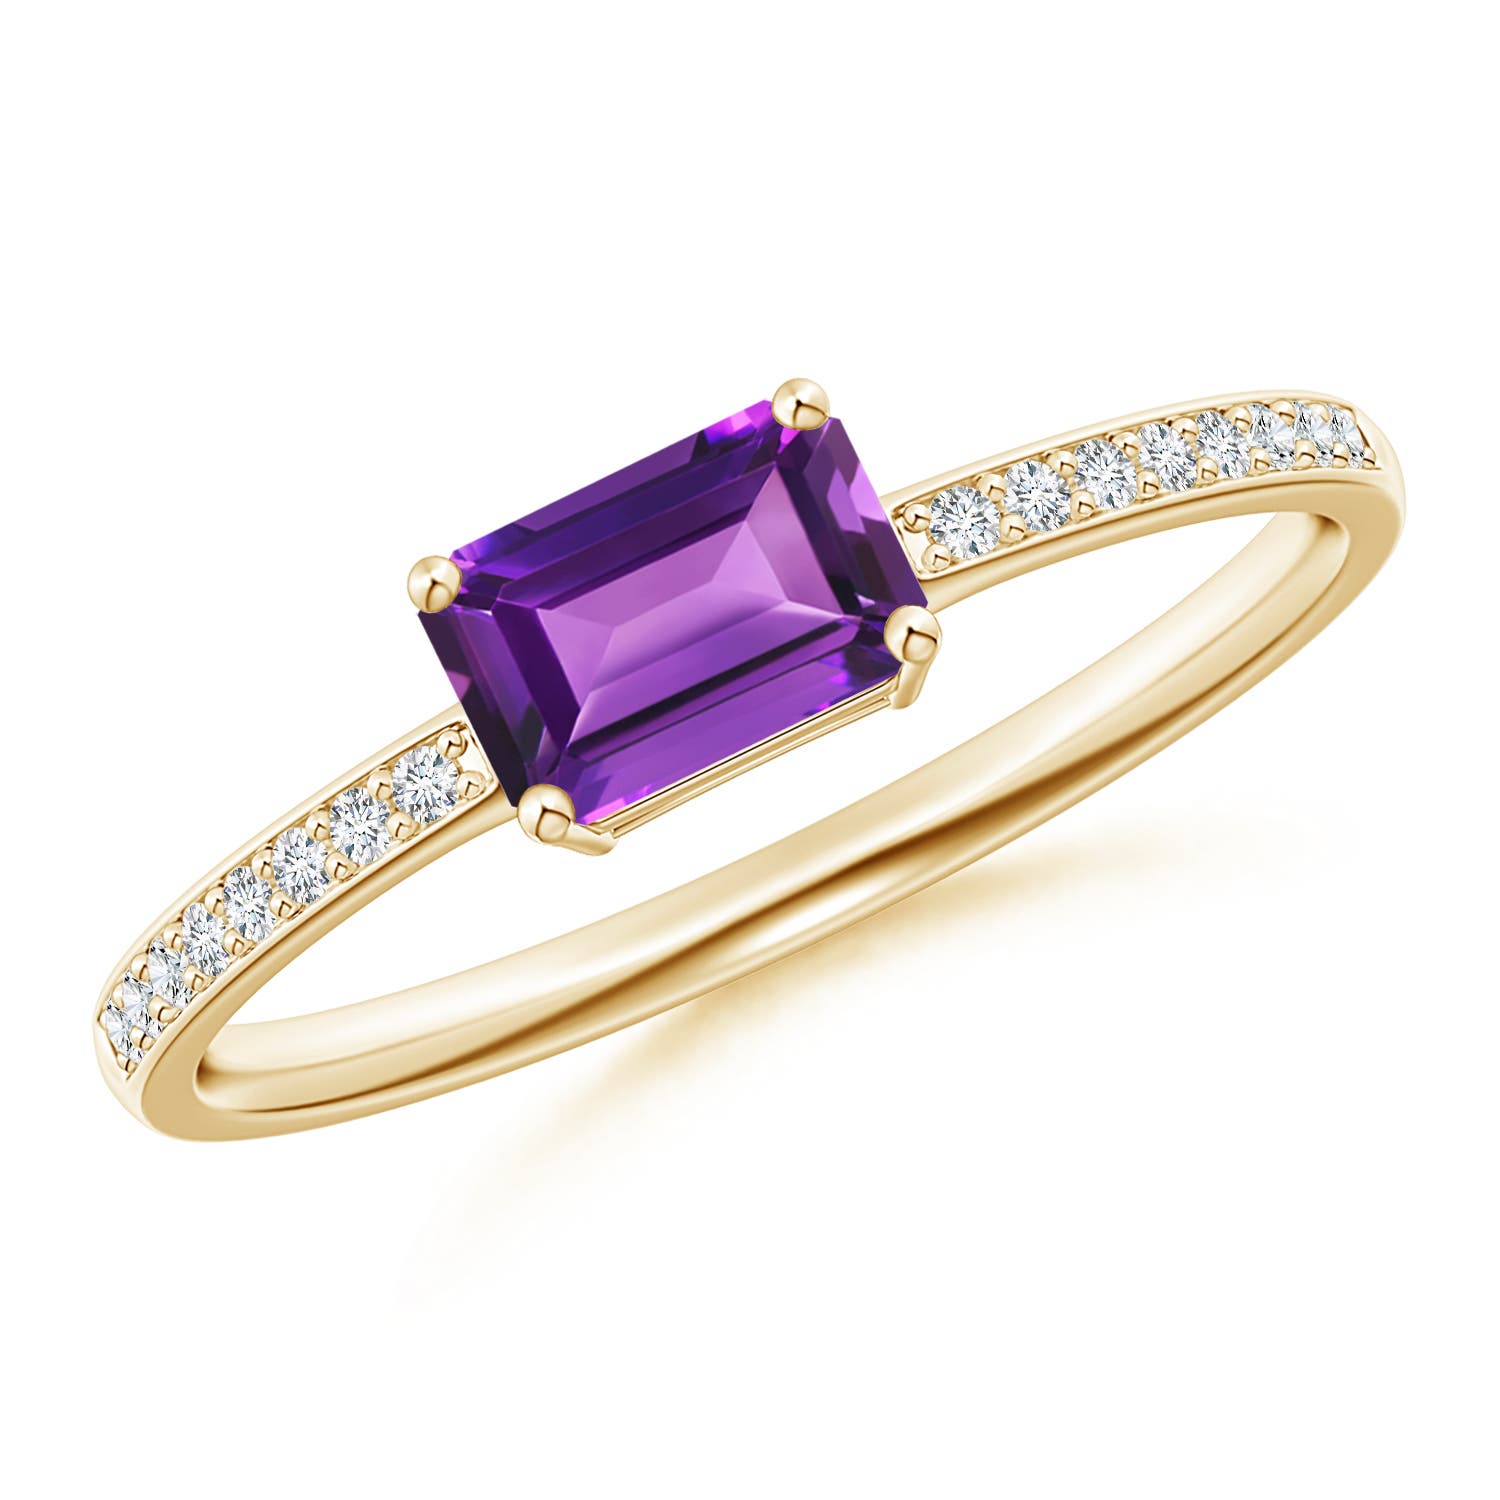 East-West Emerald-Cut Amethyst Solitaire Ring | Angara